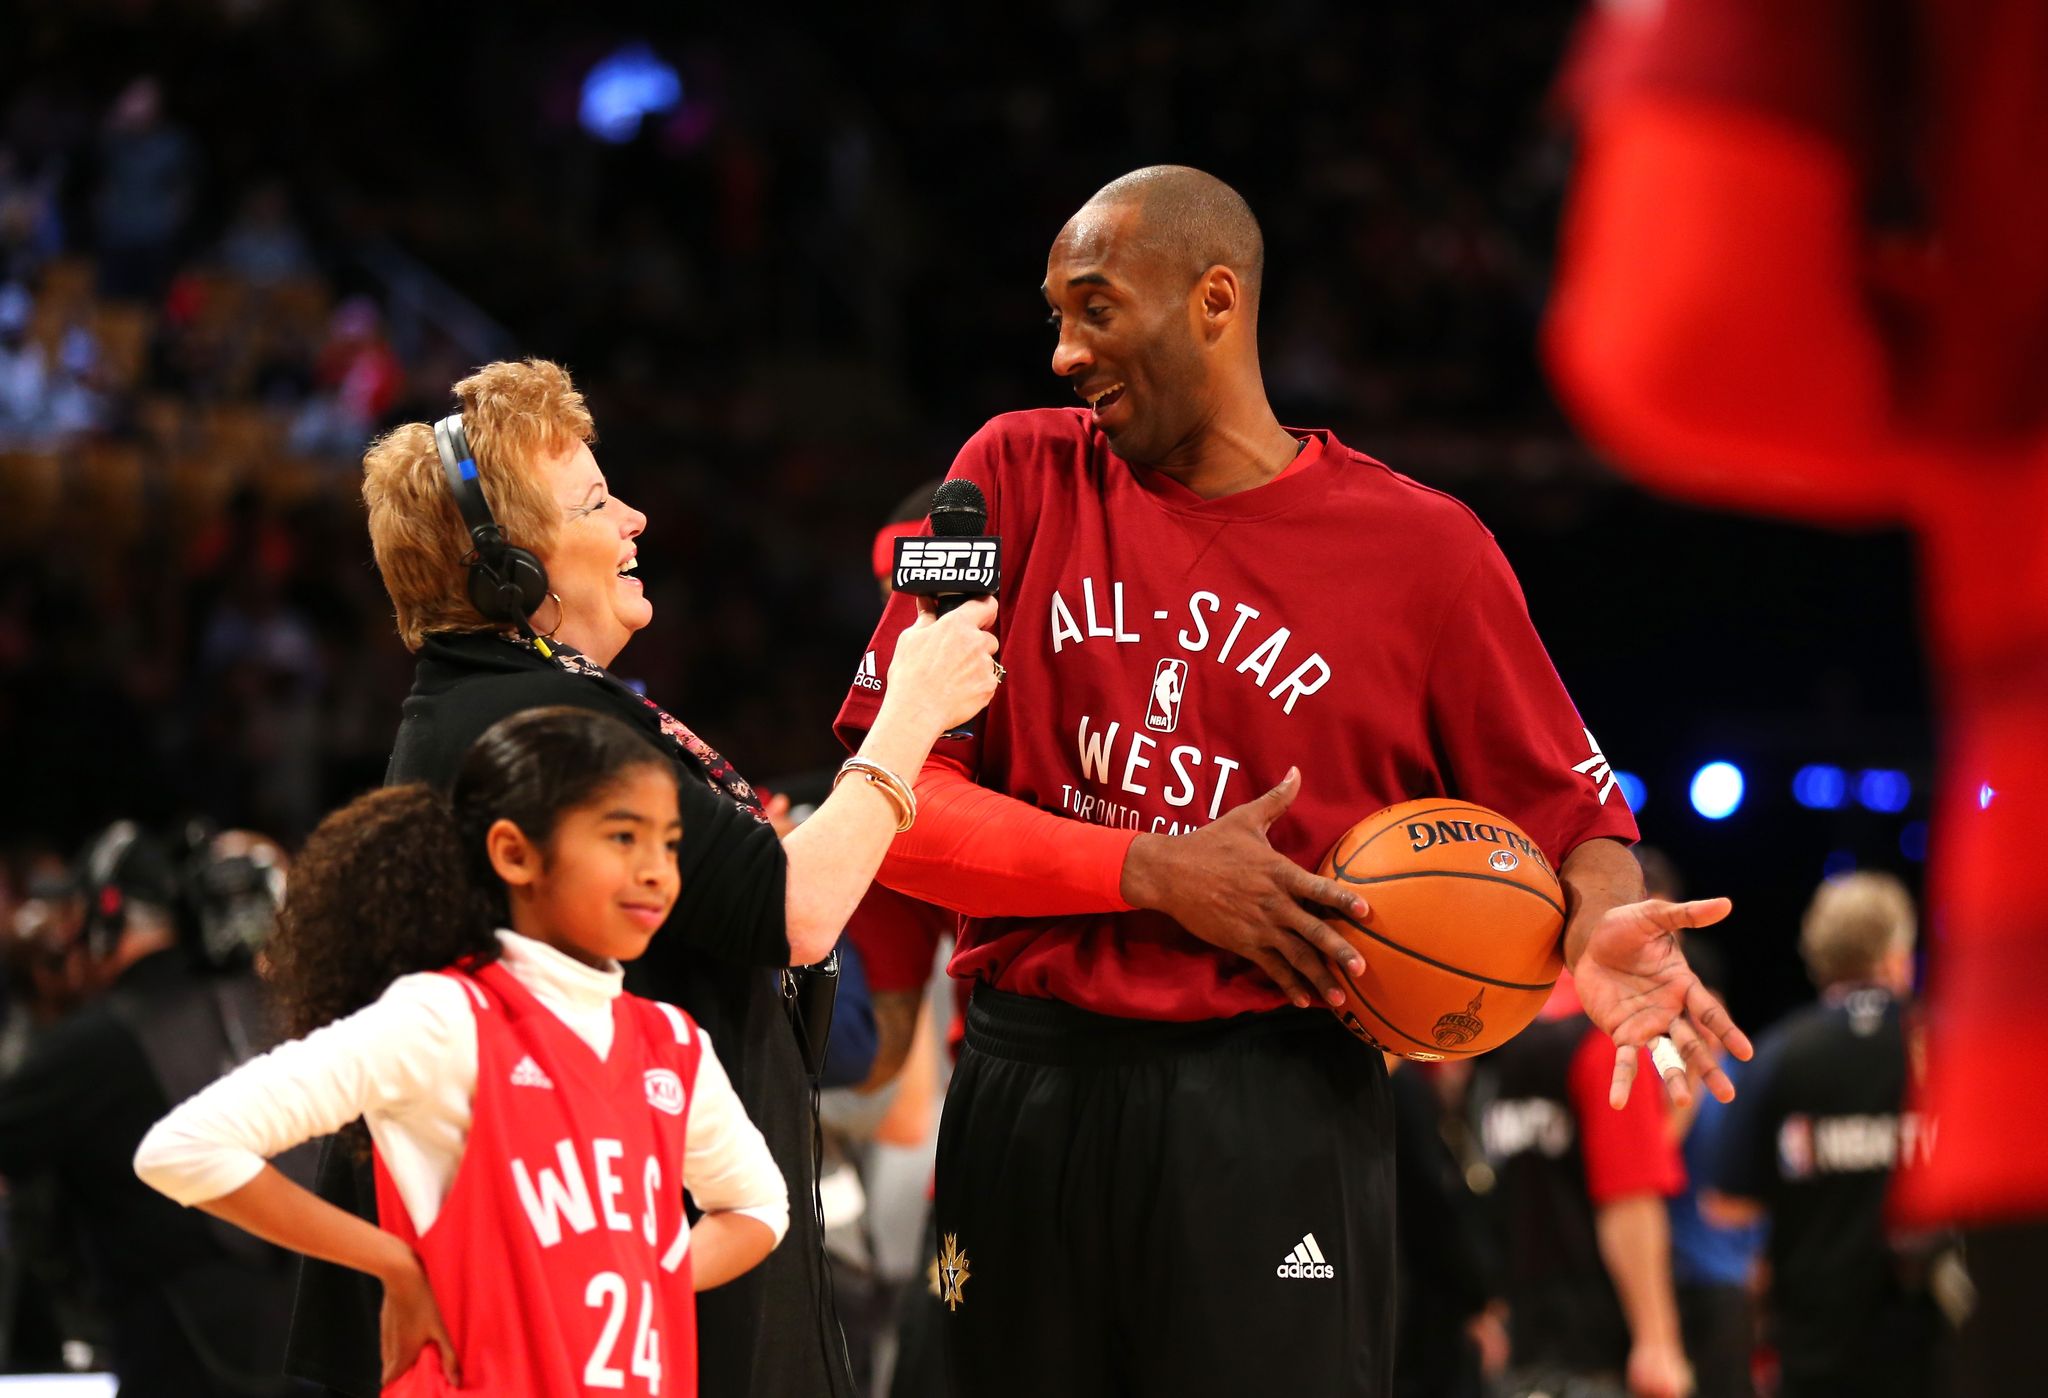 Kobe Bryant warms up with daughter Gianna Bryant at the NBA All-Star Game on February 14, 2016 in Toronto.  | Photo: Getty Images